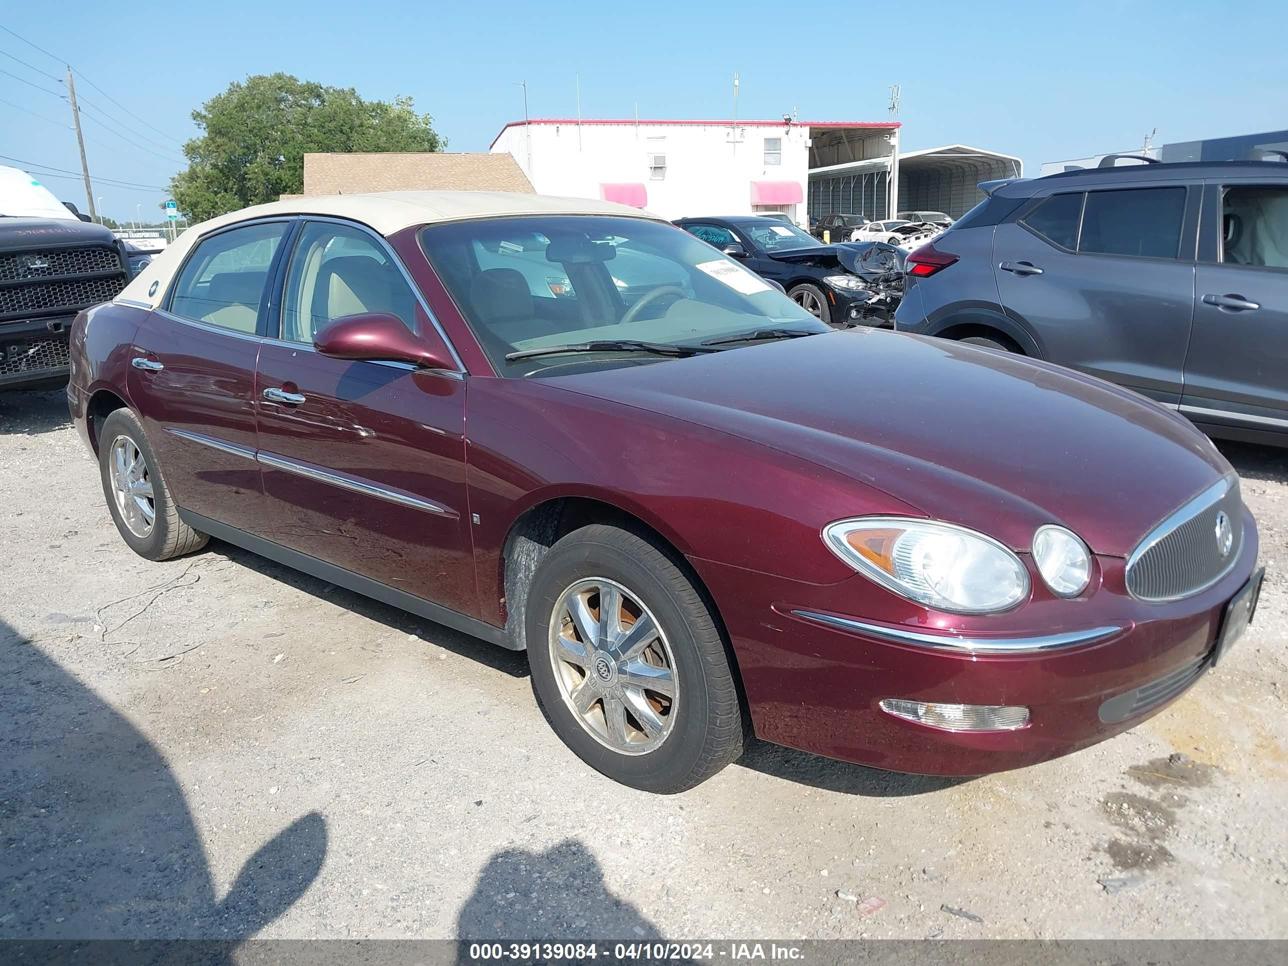 vin: 2G4WC582971226407 2G4WC582971226407 2007 buick lacrosse 3800 for Sale in 34221, 1208 17Th St. East, Palmetto, Florida, USA